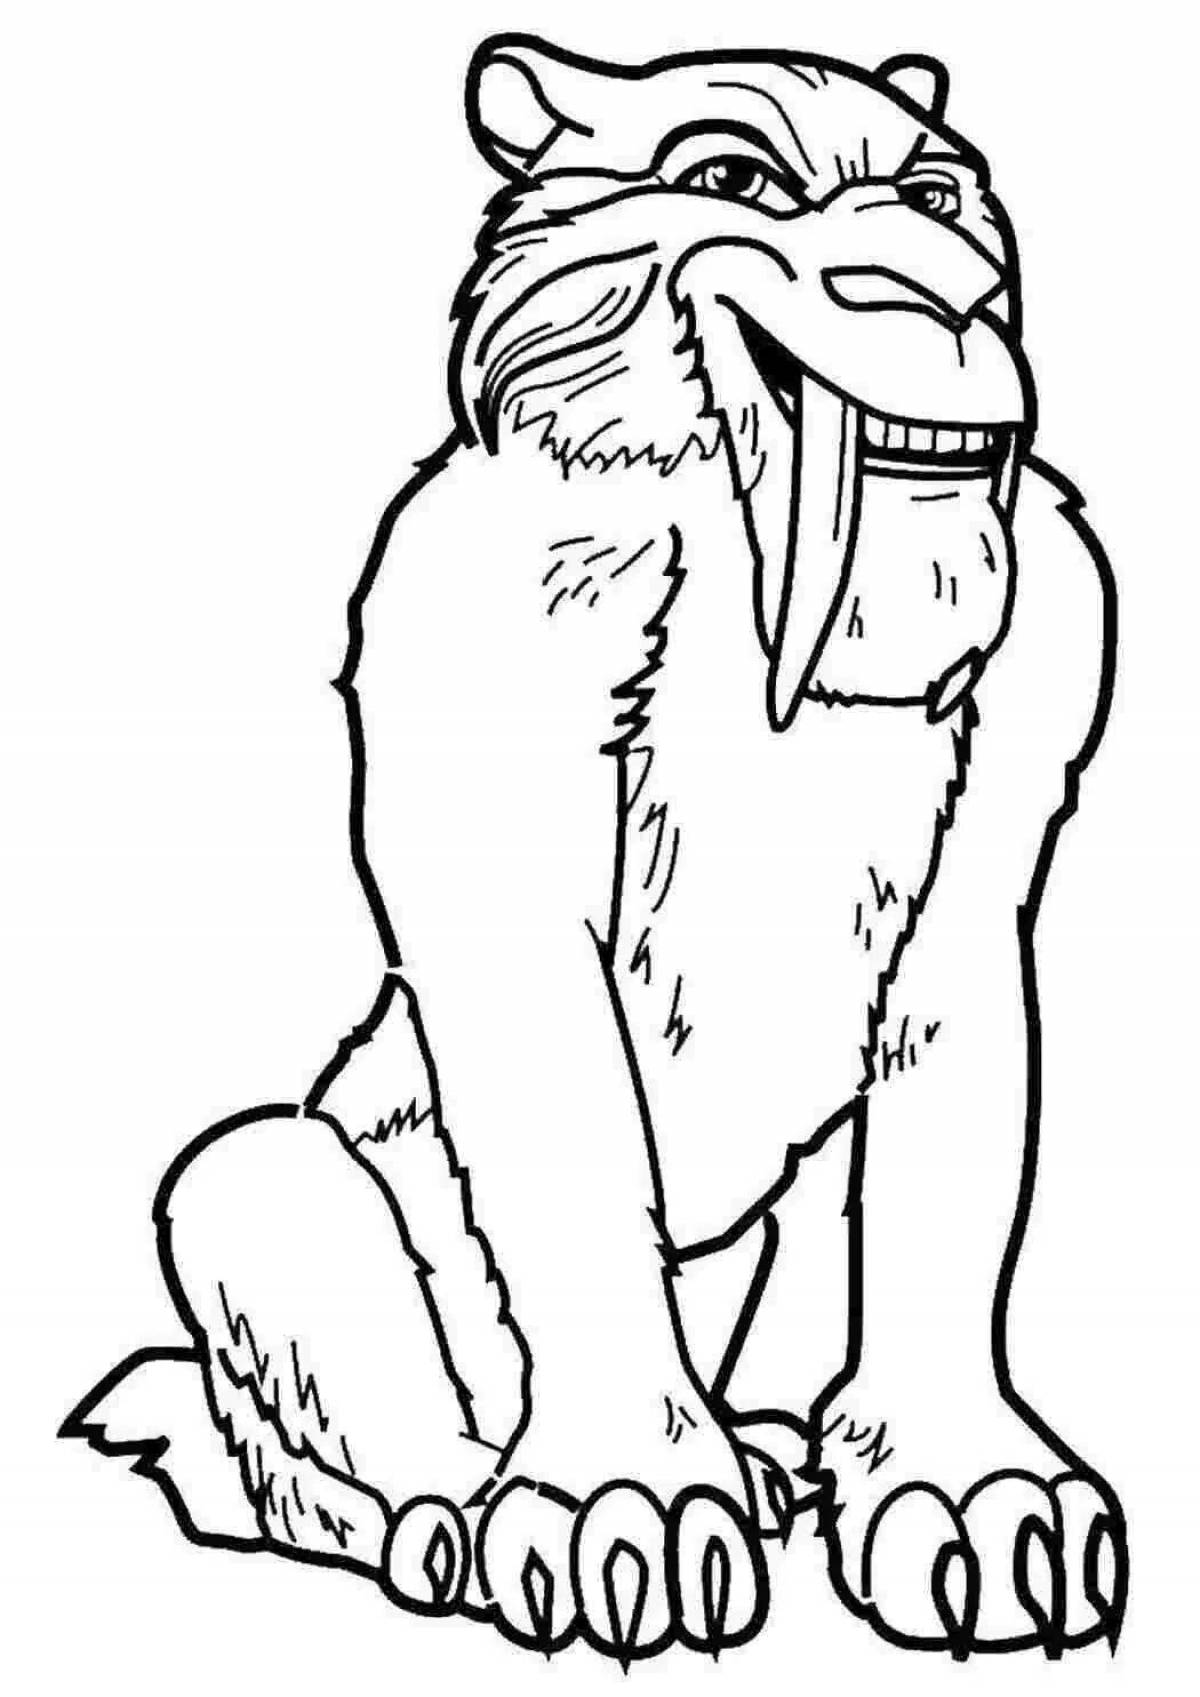 Amazing saber tooth coloring page